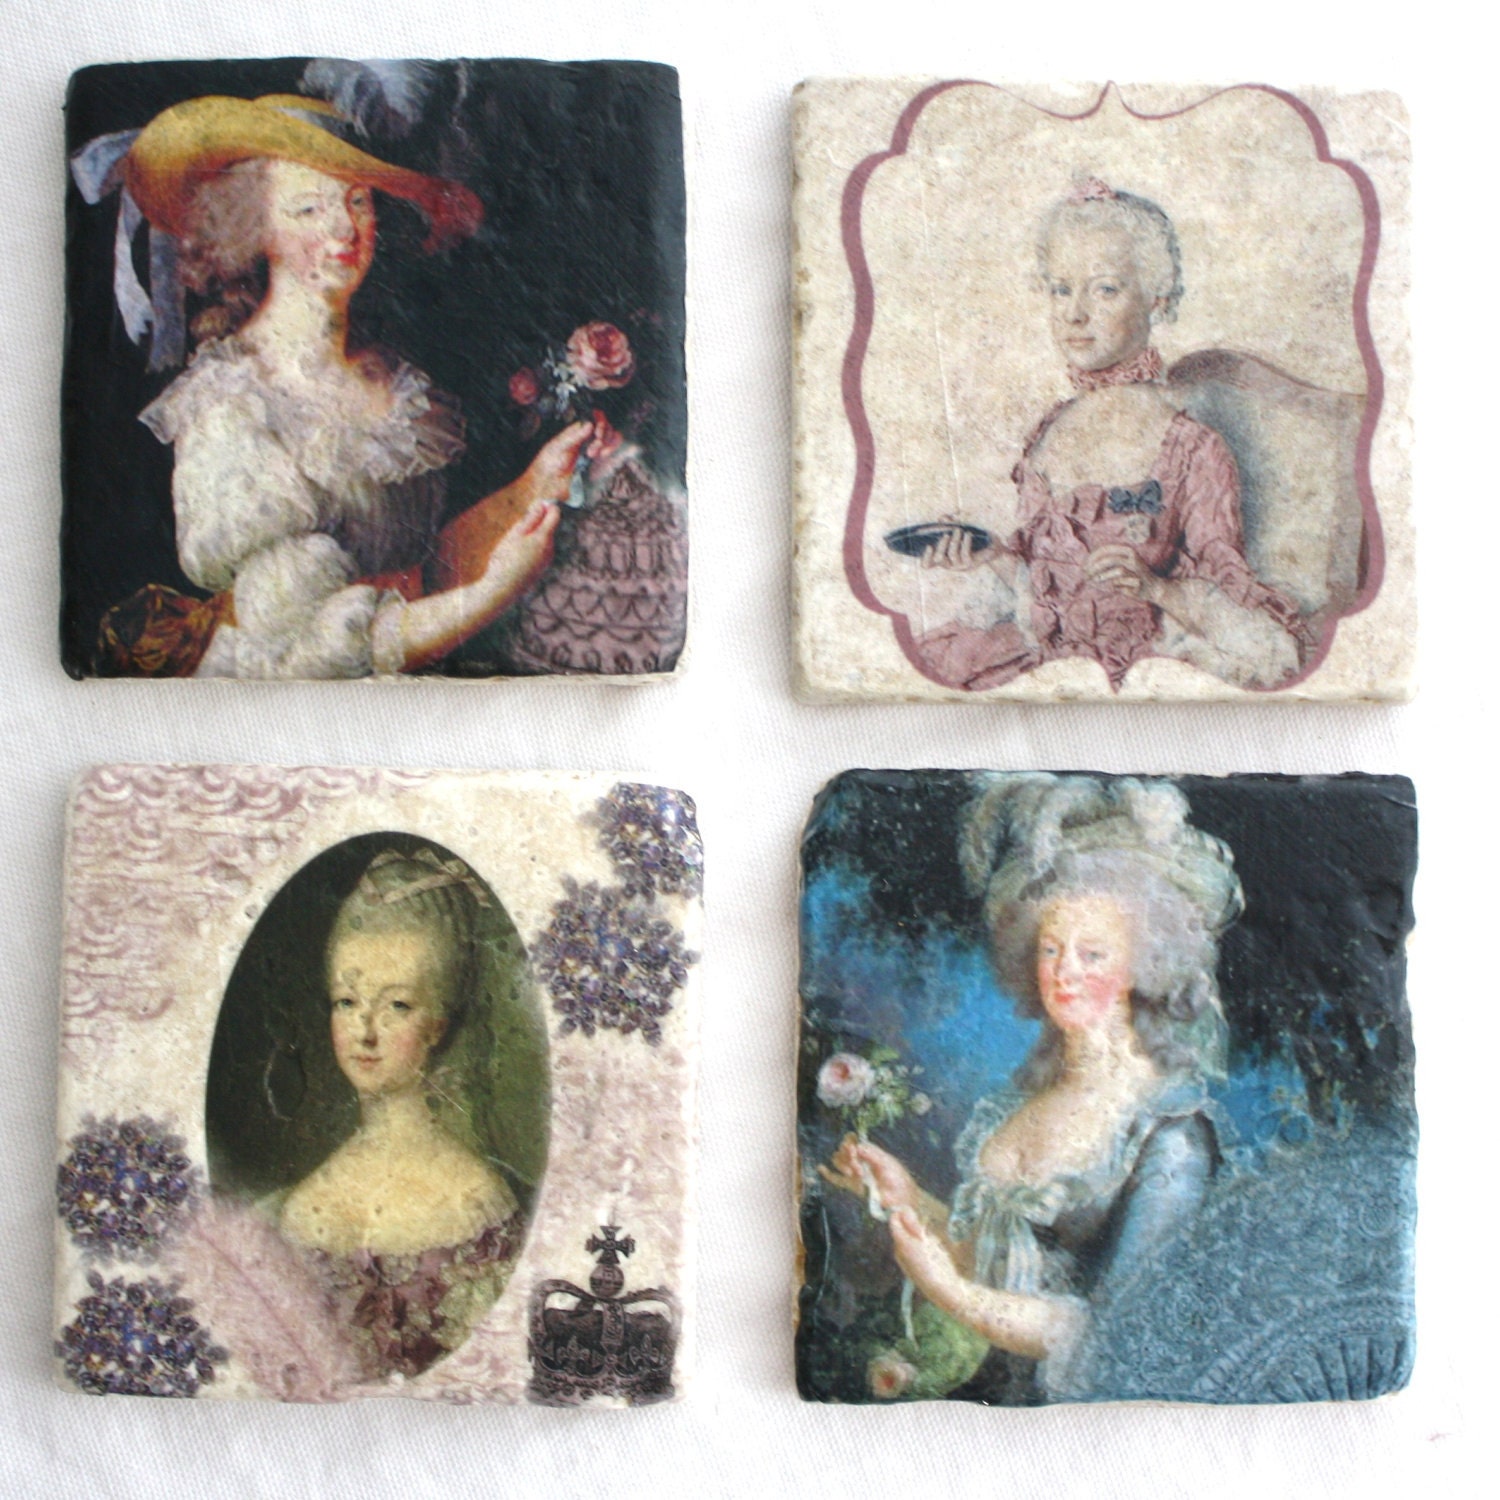 Tumbled Stone French Coasters- Marie Antoinette portraits, set of 4, water & heat safe- Free shipping insurance. French Country Decor.